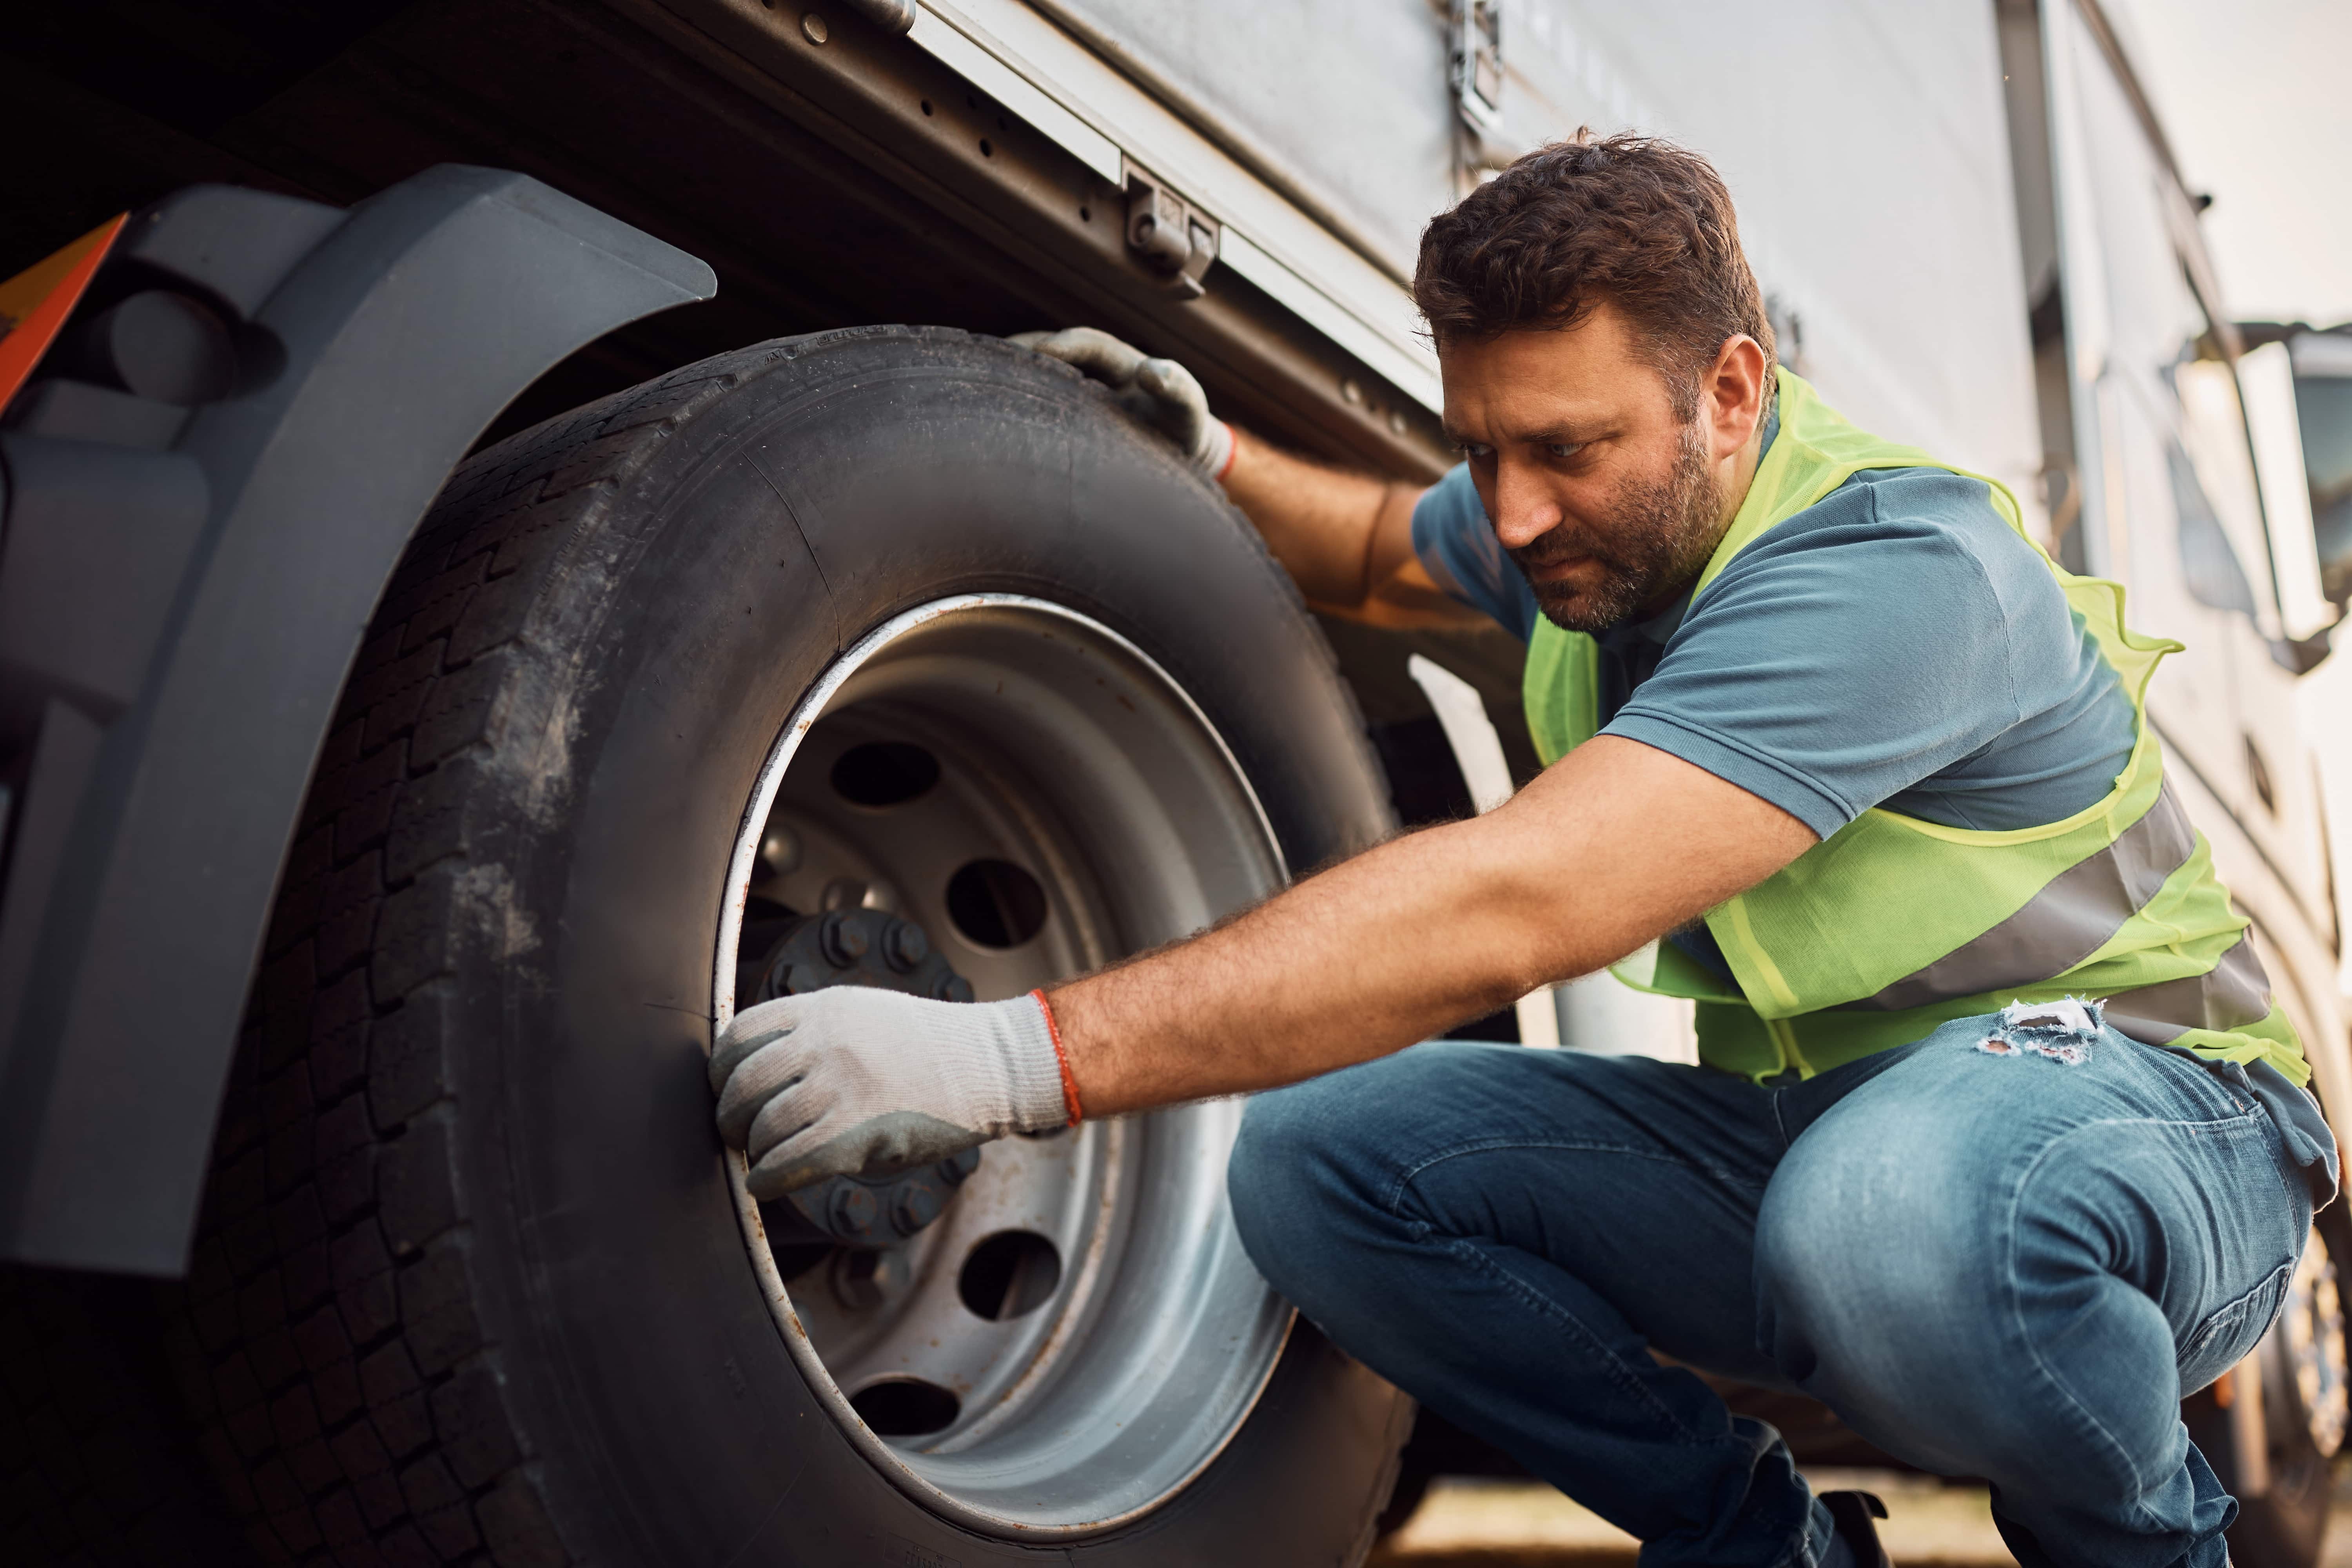 Truck Driver Injury Prevention 101: Back Support Tips